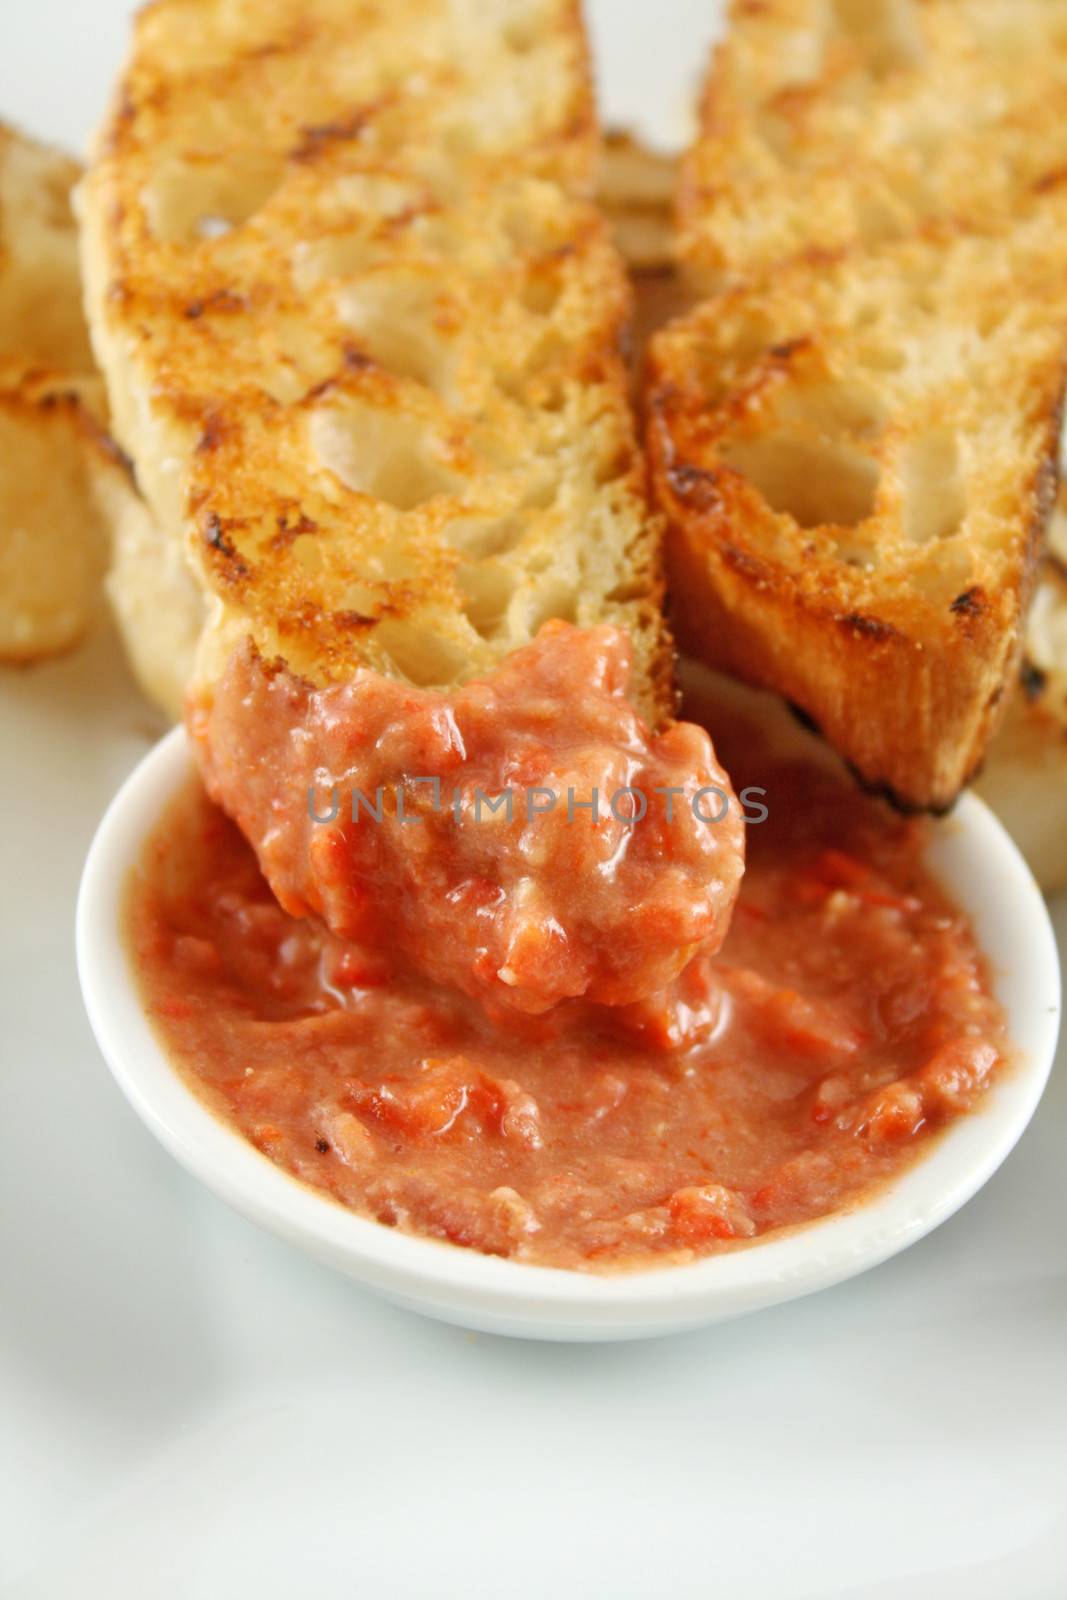 Delicious and colorful capsicum dip with grilled Turkish bread.